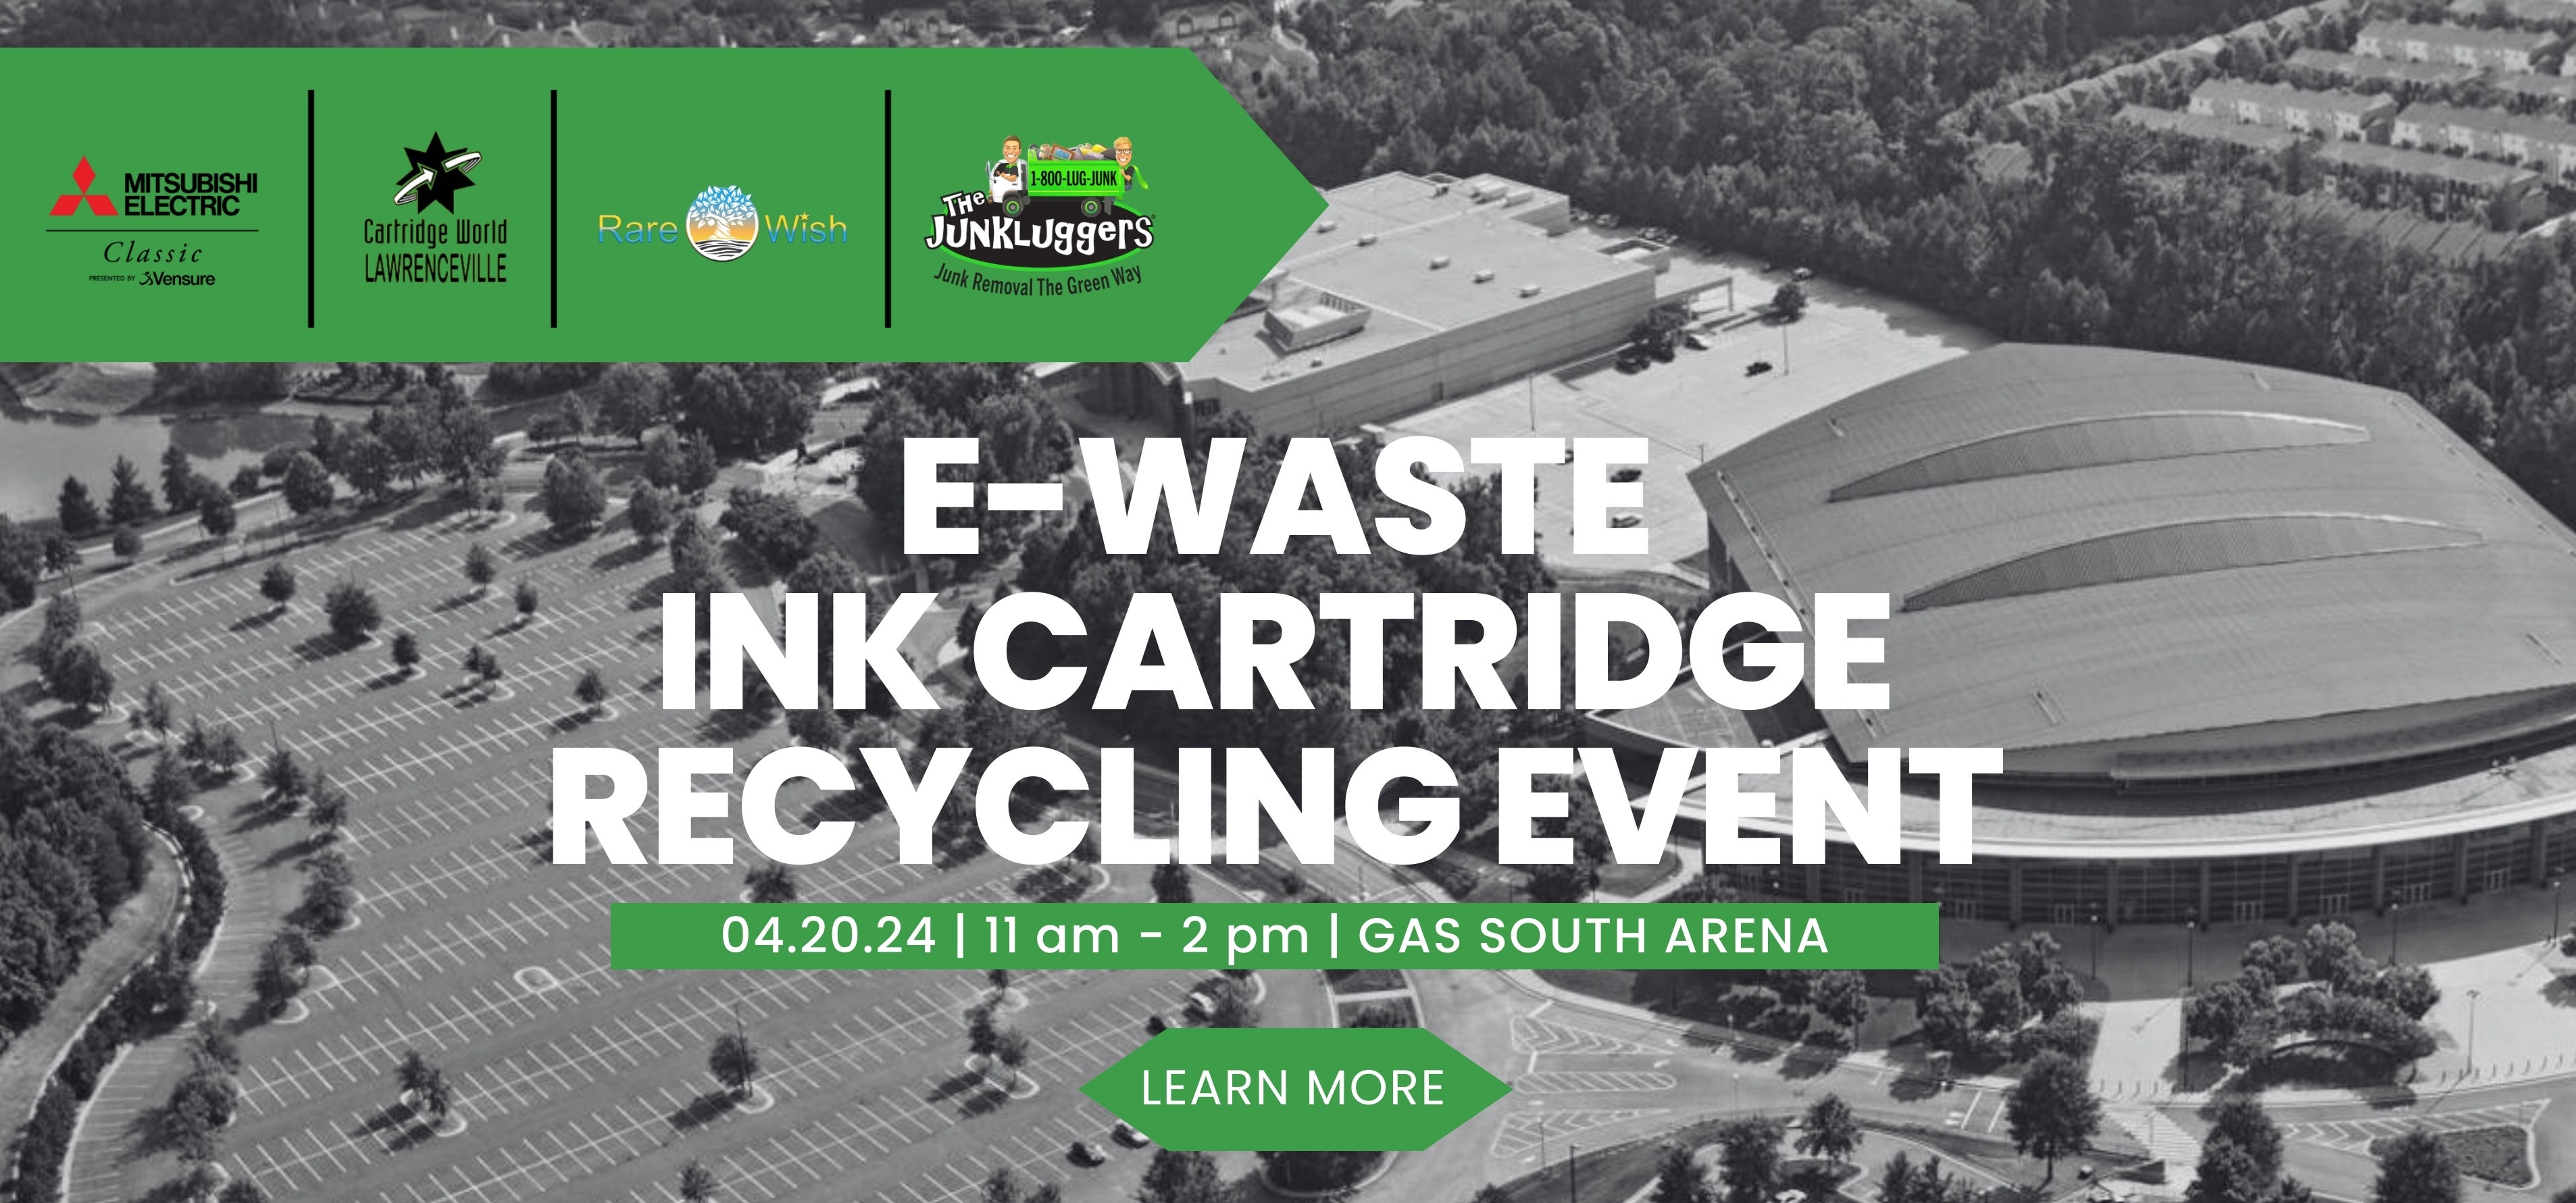 E-Waste Ink Cartridge and Recycling Event